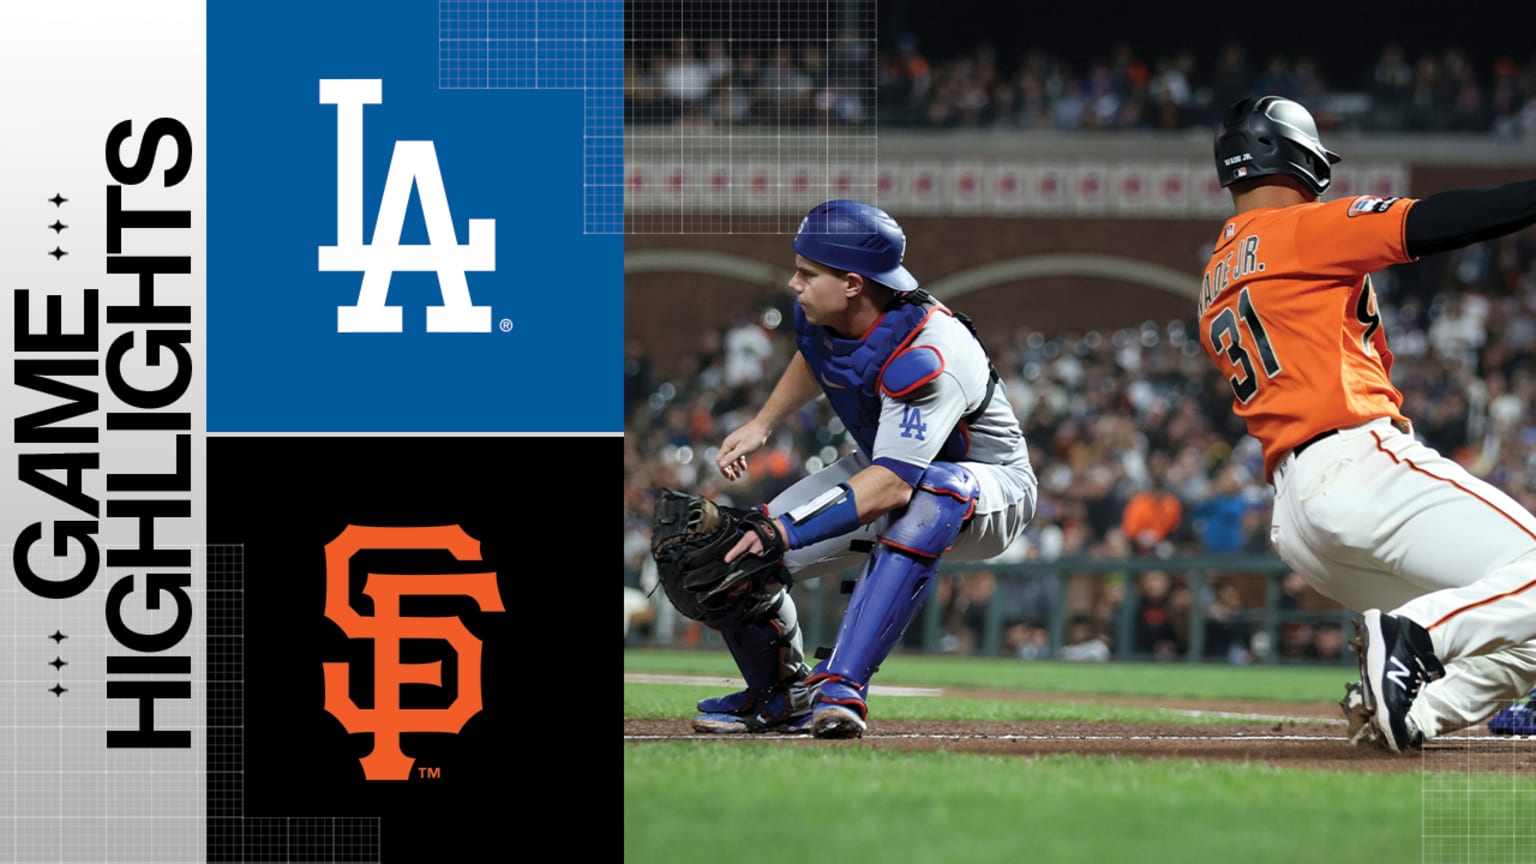 How to watch San Francisco Giants vs. Los Angeles Dodgers